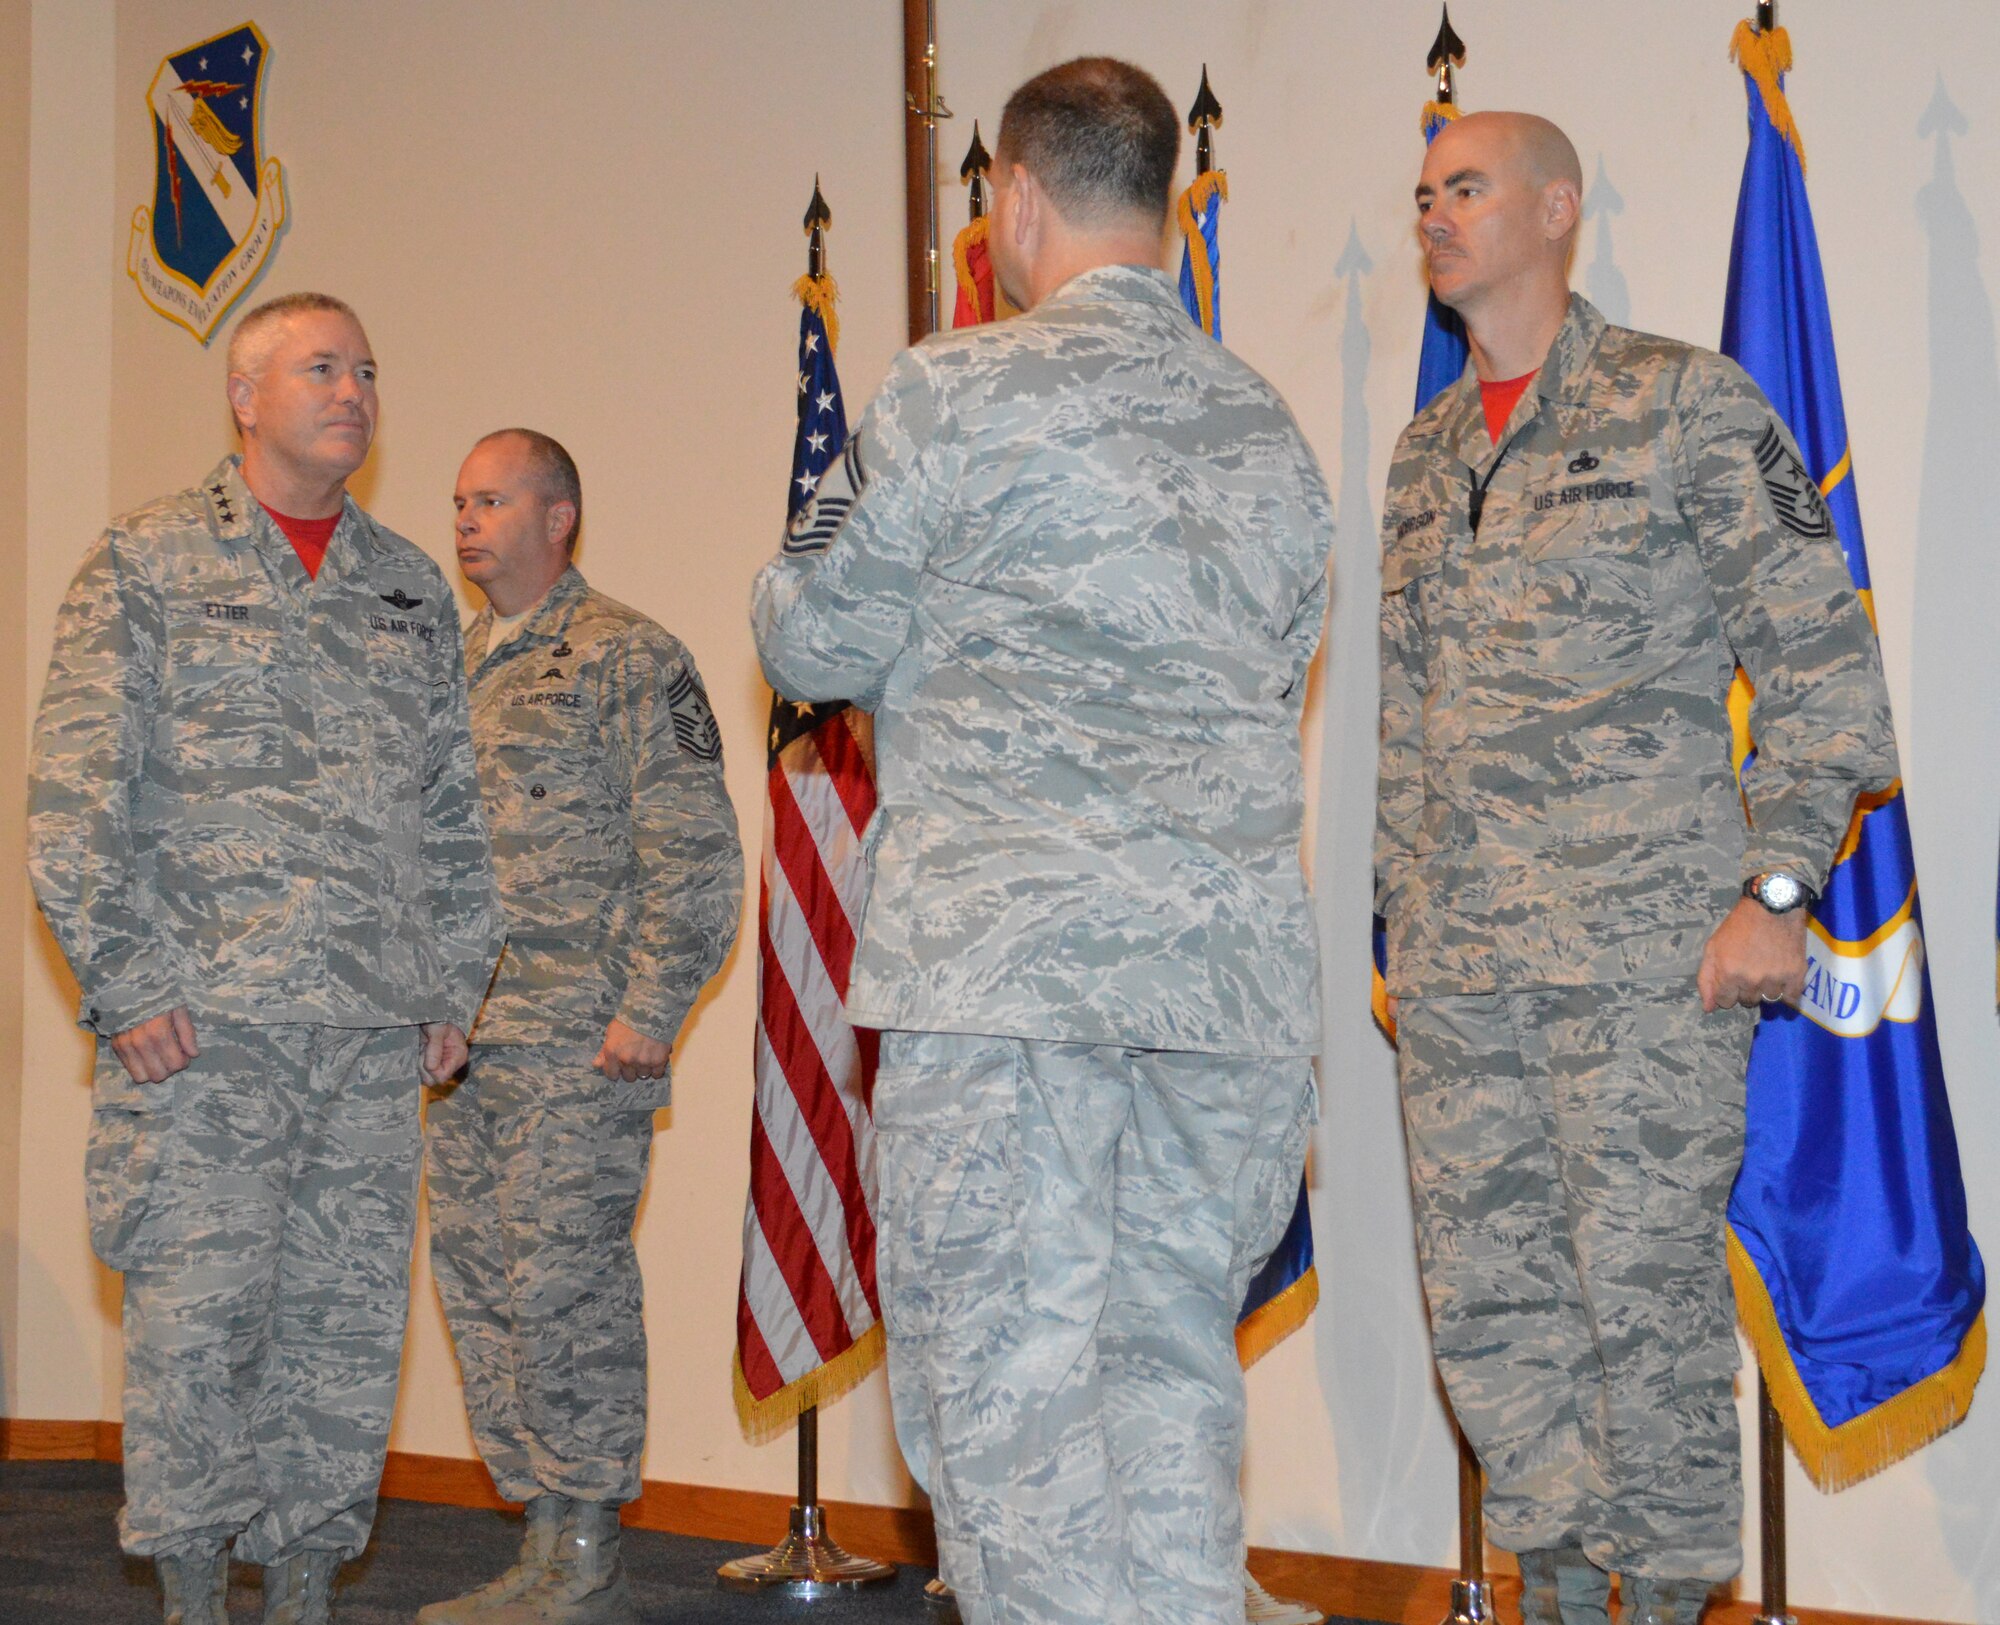 While Chief Master Sgt. James Hotaling, Air National Guard Command Chief, (left)and Chief Master Sgt. Ronald Anderson, Continental U.S. North American Aerospace Defense Region-1st Air Force (Air Forces Northern) Command Chief,  stand at attention, Lt. Gen. William Etter, Commander, waits to be presented  a  1600-era replica musket from Senior Master Sgt. Paul Williams, Combined Enlisted Association member.  Etter accepted the presentation from the CEA on behalf of the CONR-1st AF (AFNORTH) organization.  The CEA presented the musket to the organization as a tribute to acknowledge the nation’s military heritage and commitment to the defense of freedom. (Photo by Mary McHale)